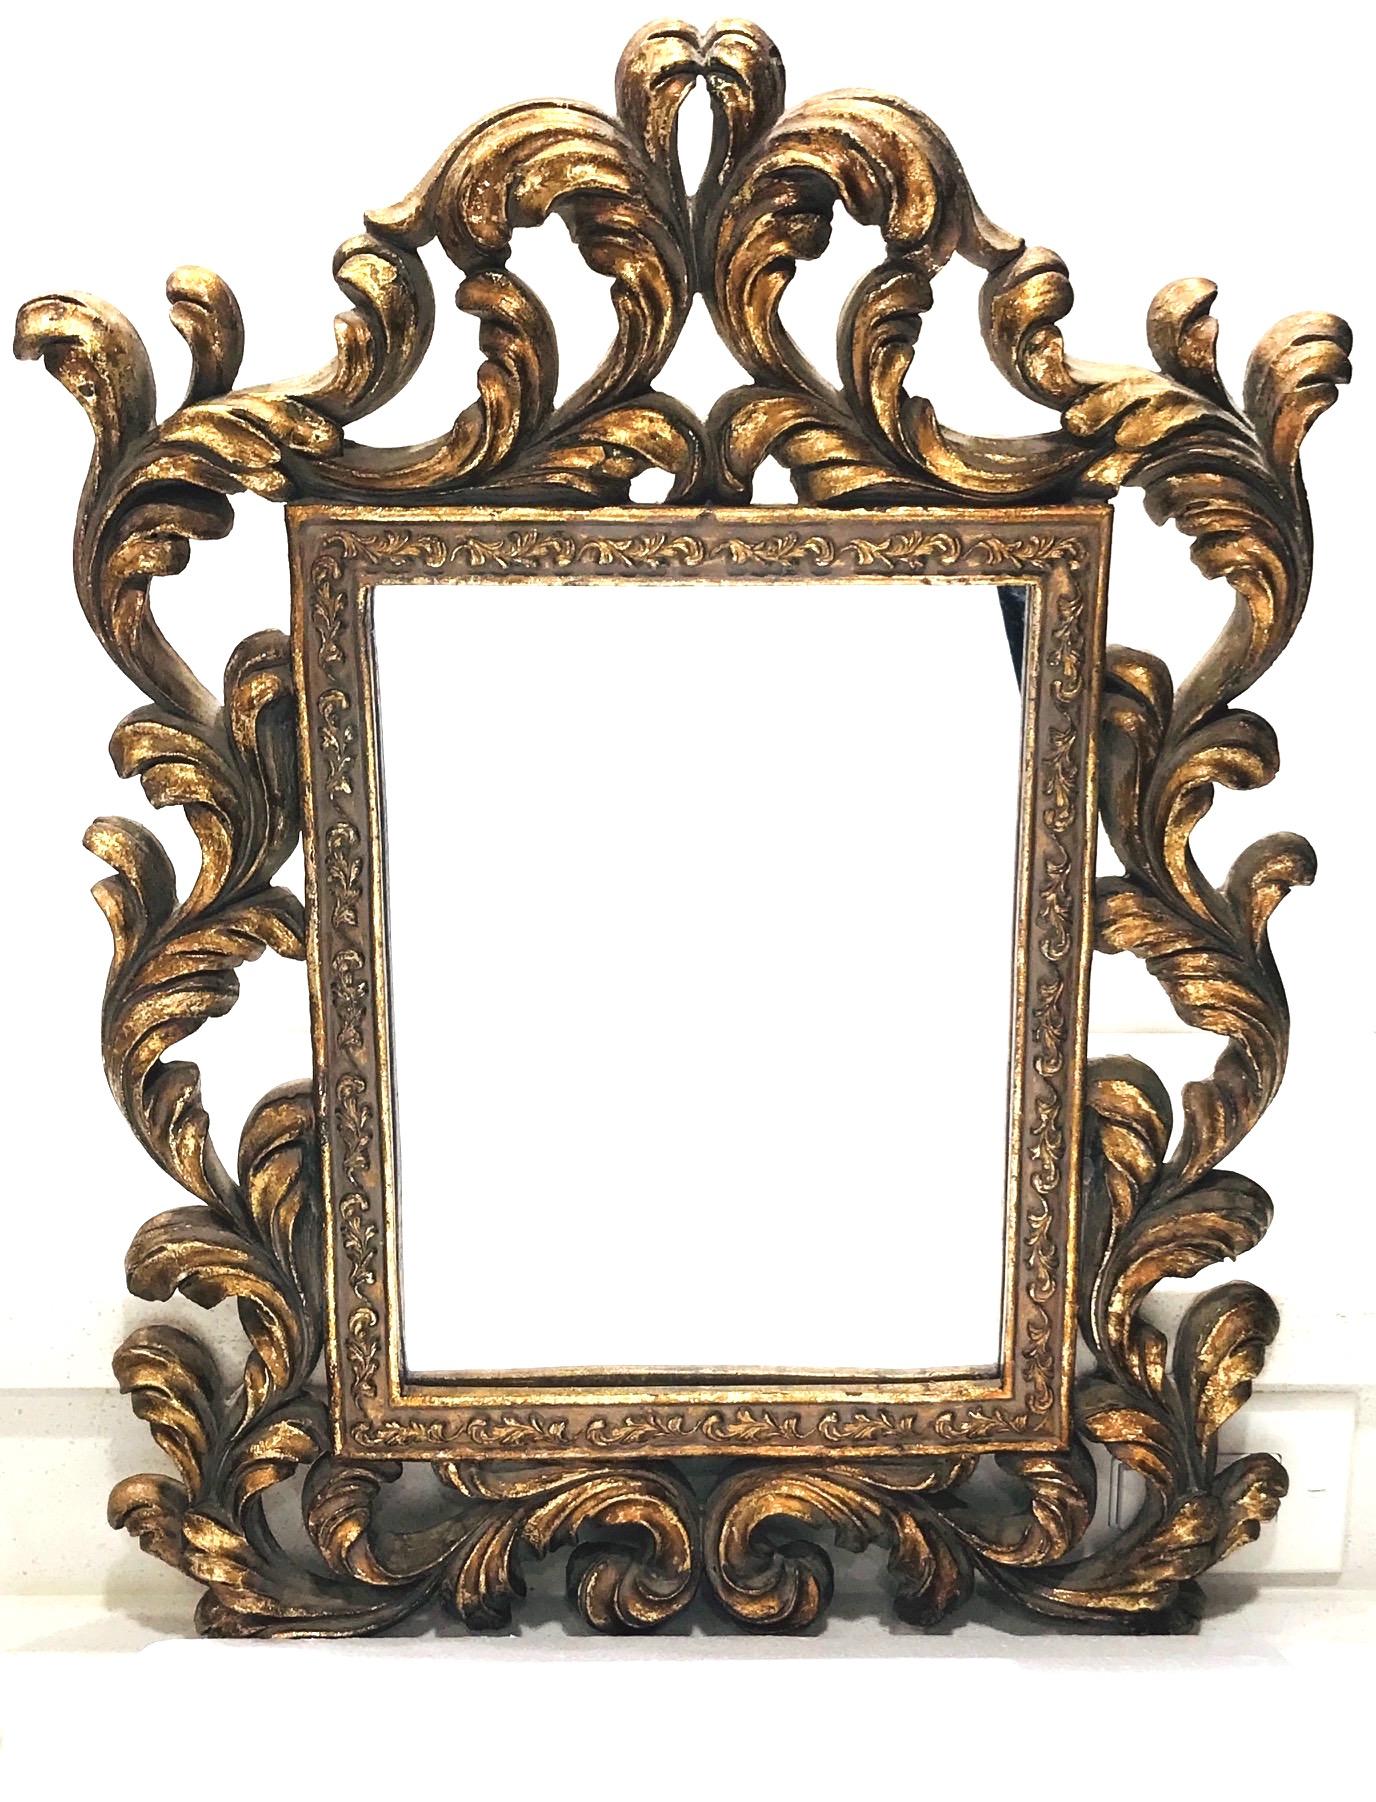 Hollywood Regency Baroque style mirror features a solid wood frame with hand carved designs and antique gold leaf finish. The ornamental frame features stylized scrolls of foliage and Prince of Wales plumes. The rectangular inner frame has a series